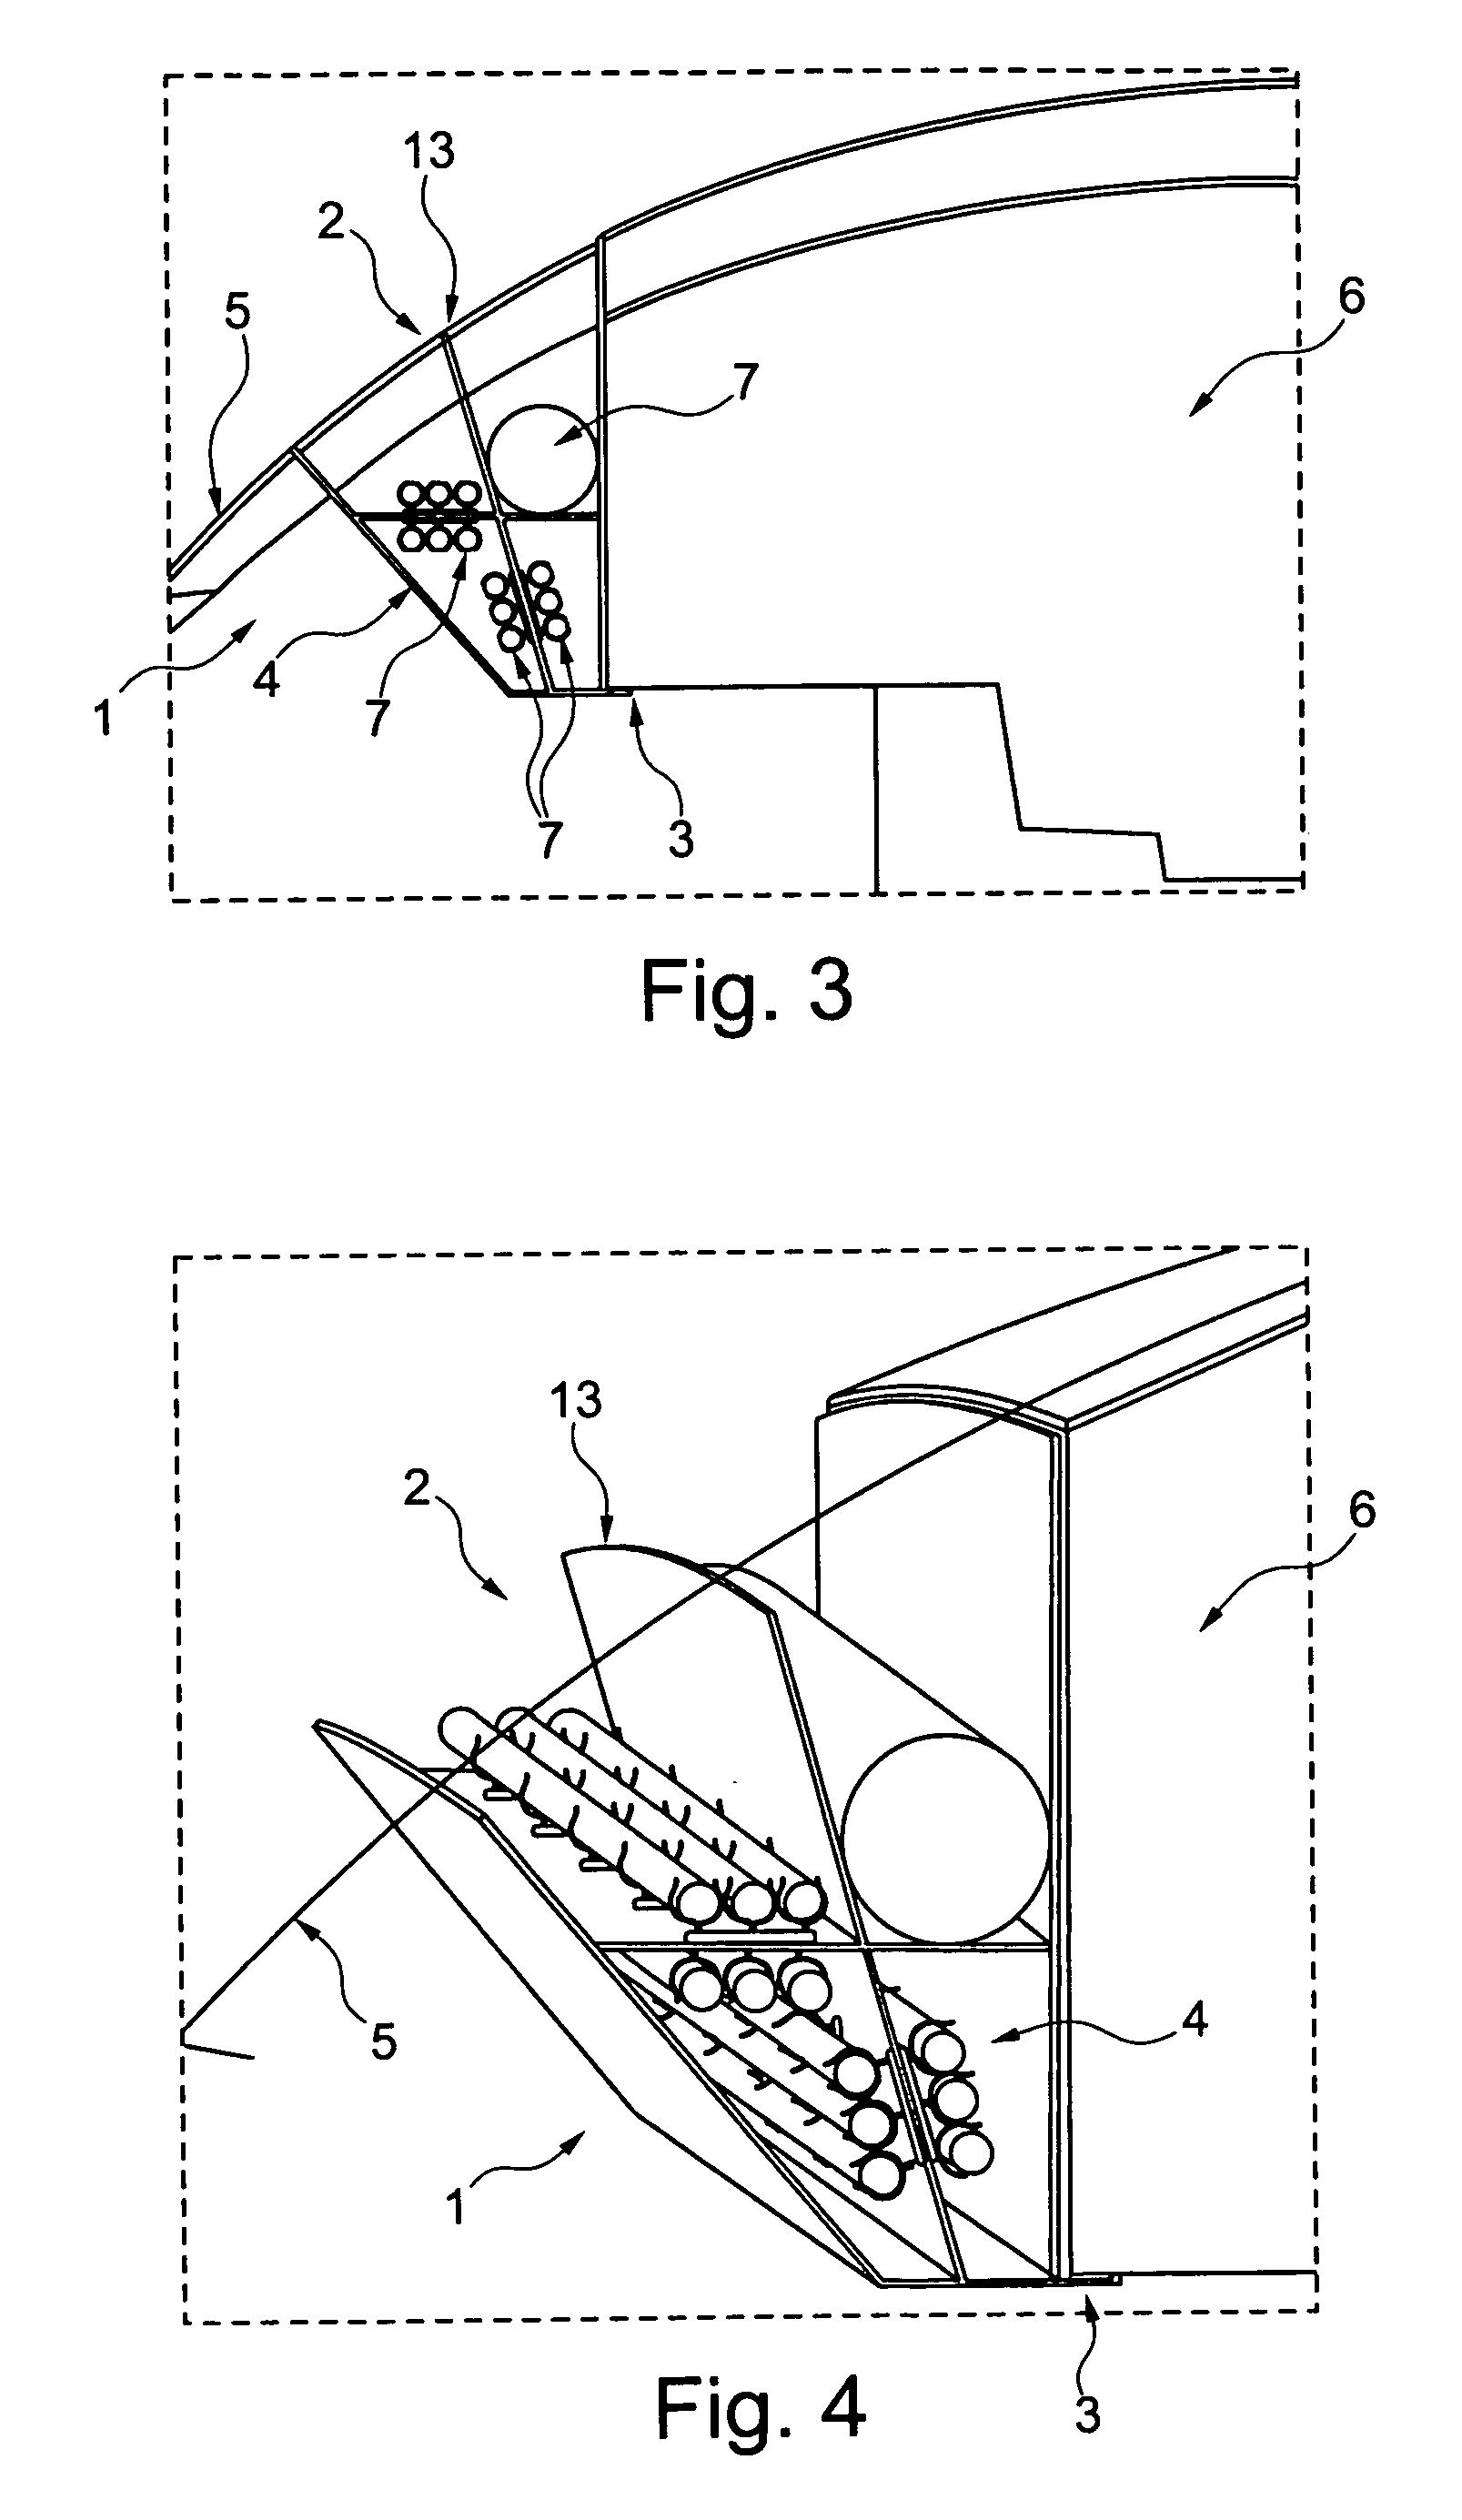 System box for accommodating aircraft systems